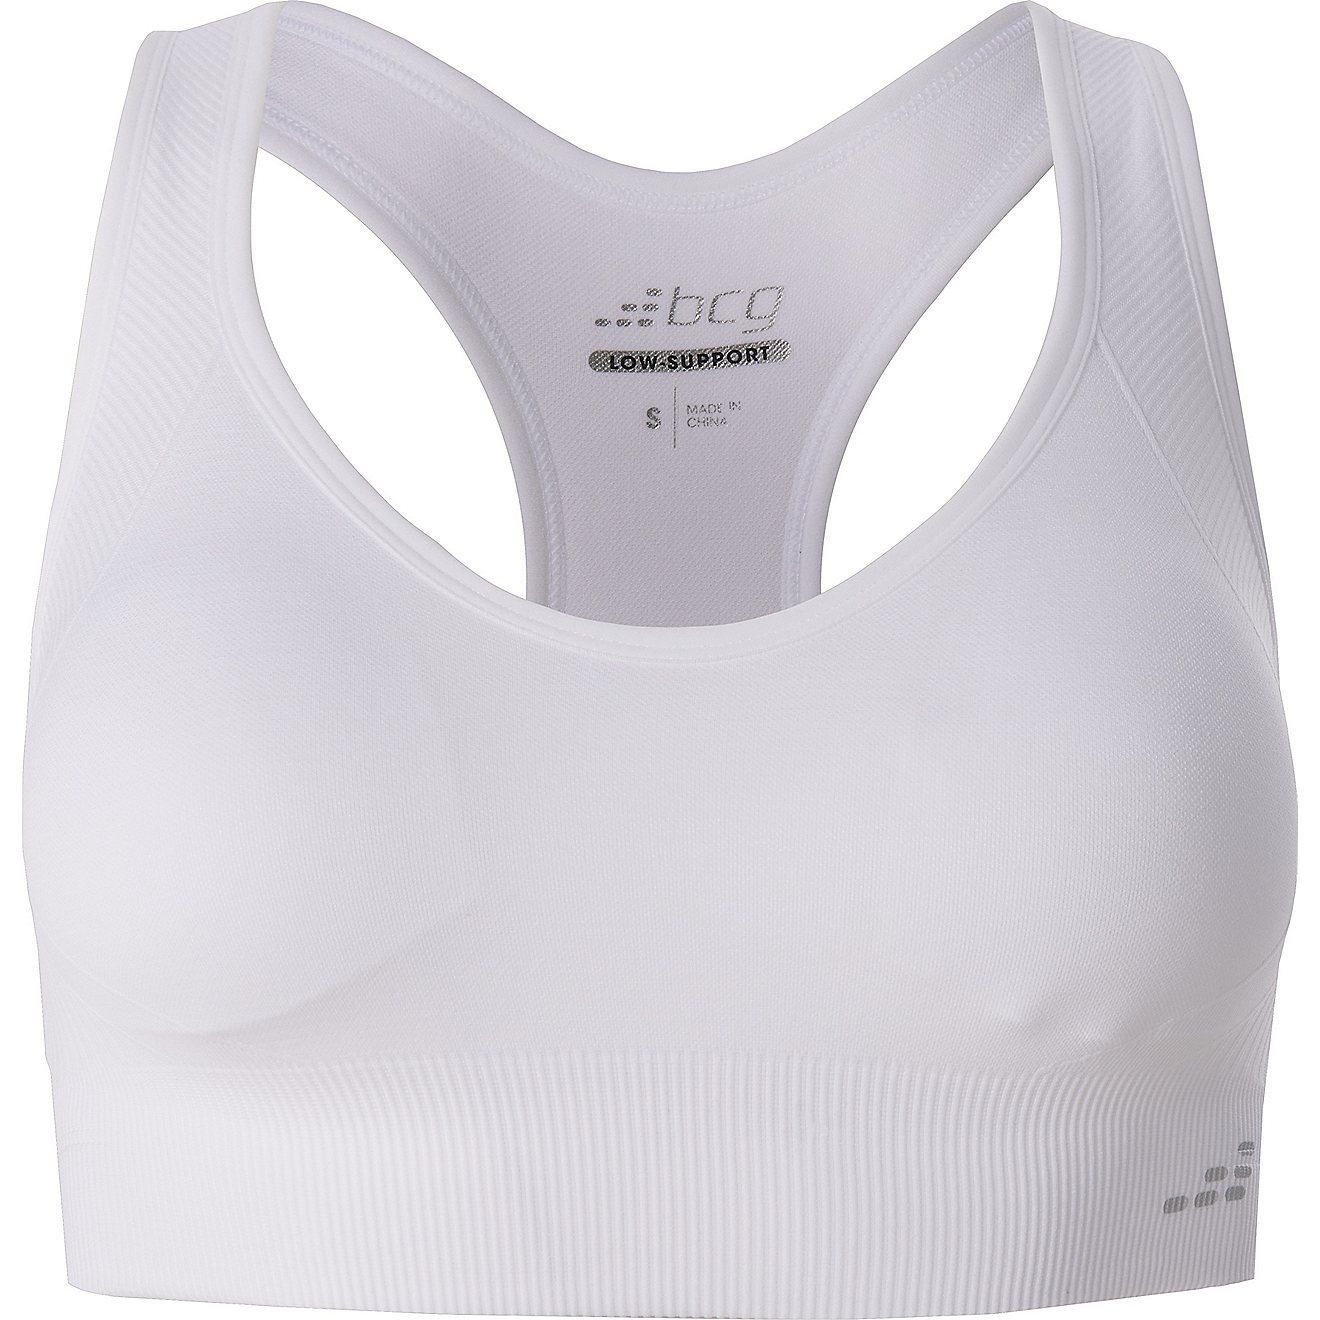 BCG Women's Training Low Support Racerback Sports Bra                                                                            - view number 1